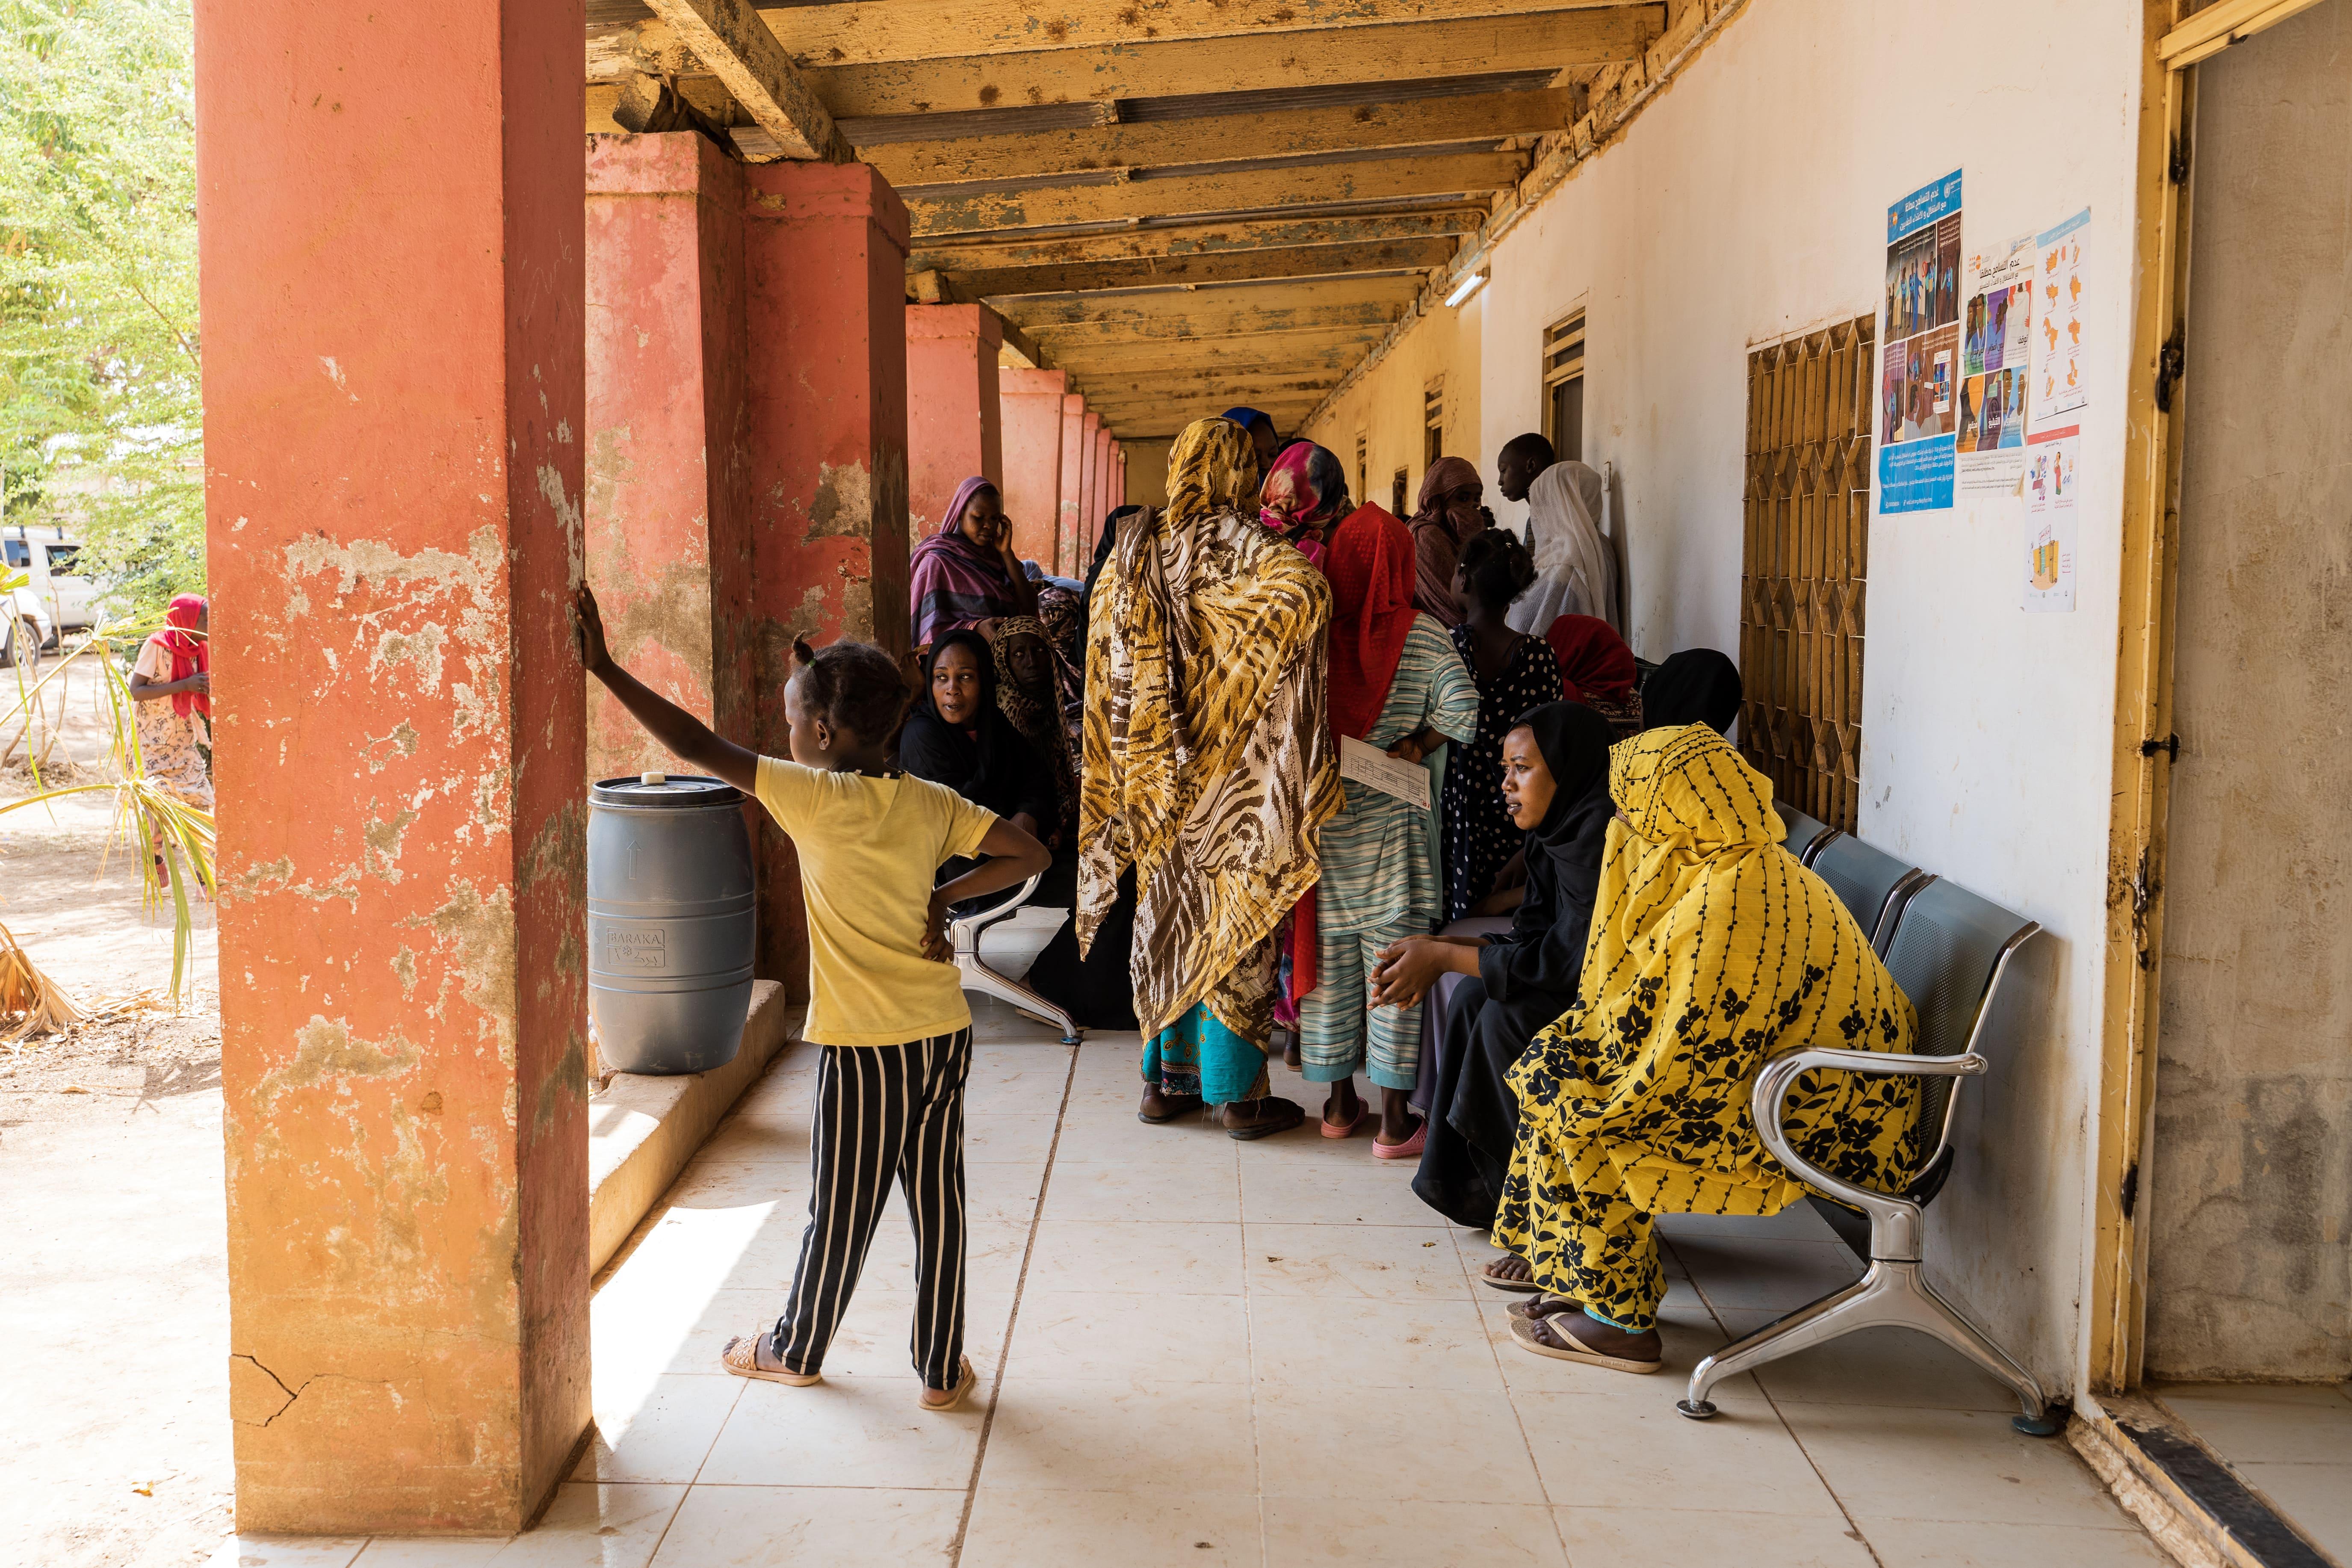 Wad Madani Sudan: On average, about 50 patients visit the clinic seeking medical attention.